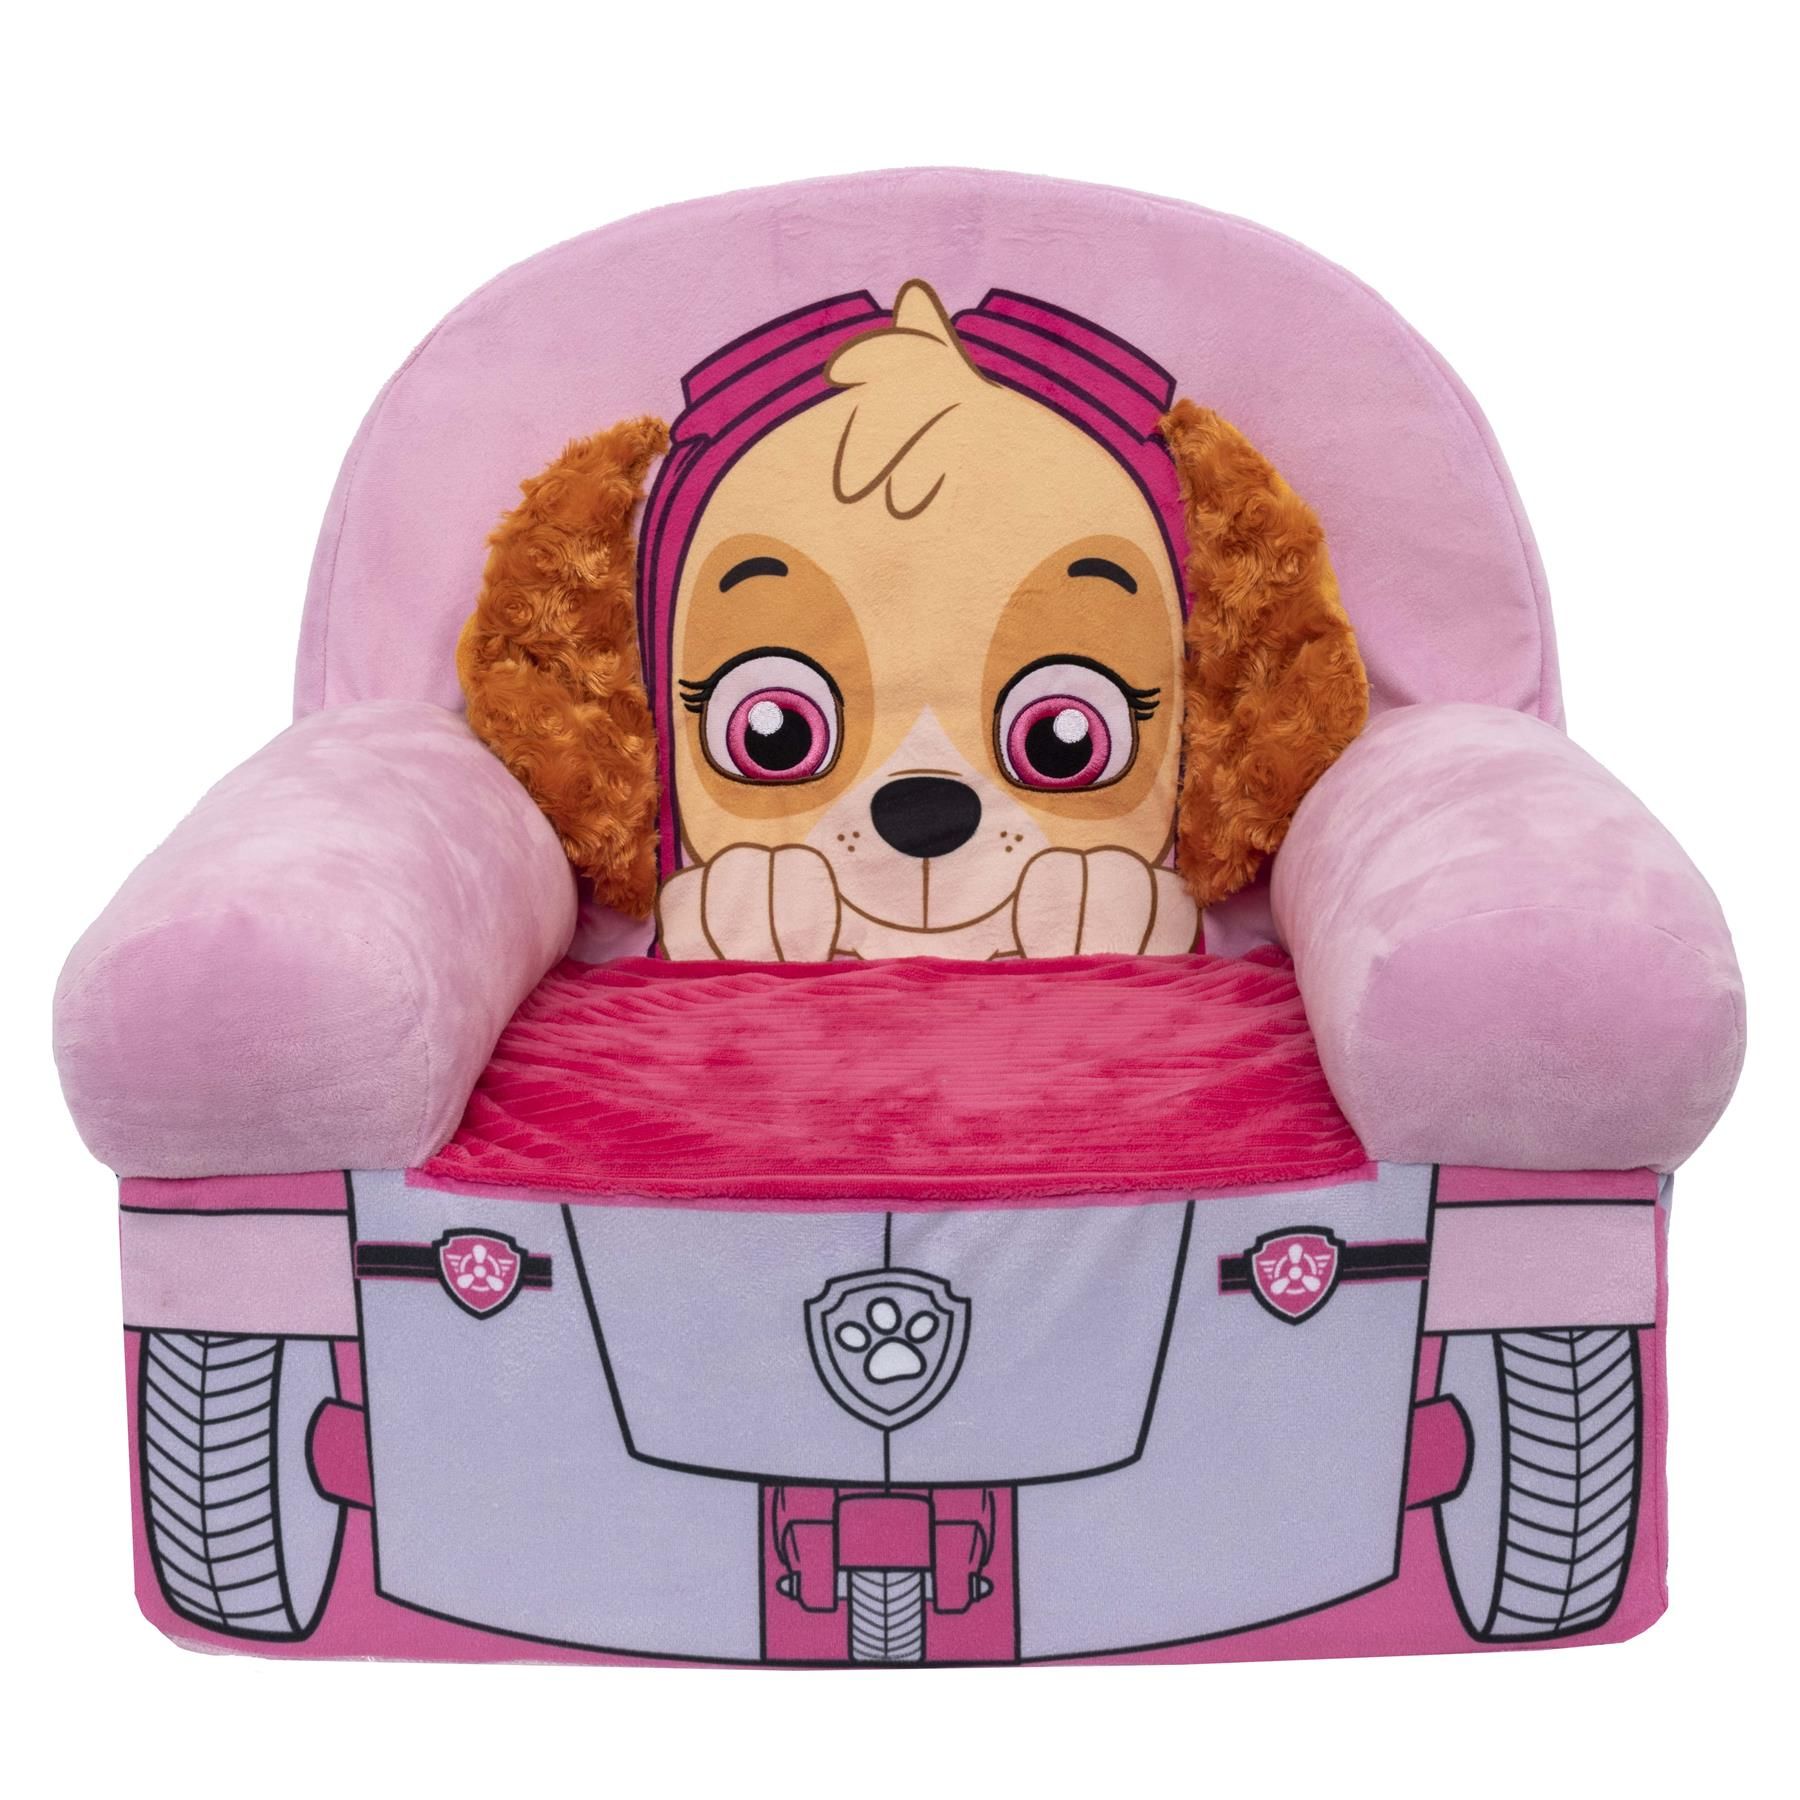 Buy Paw Patrol Skye Plush Chair at BargainMax | Free Delivery over £  and Buy Now, Pay Later with Klarna, ClearPay & Laybuy | Bargain Max